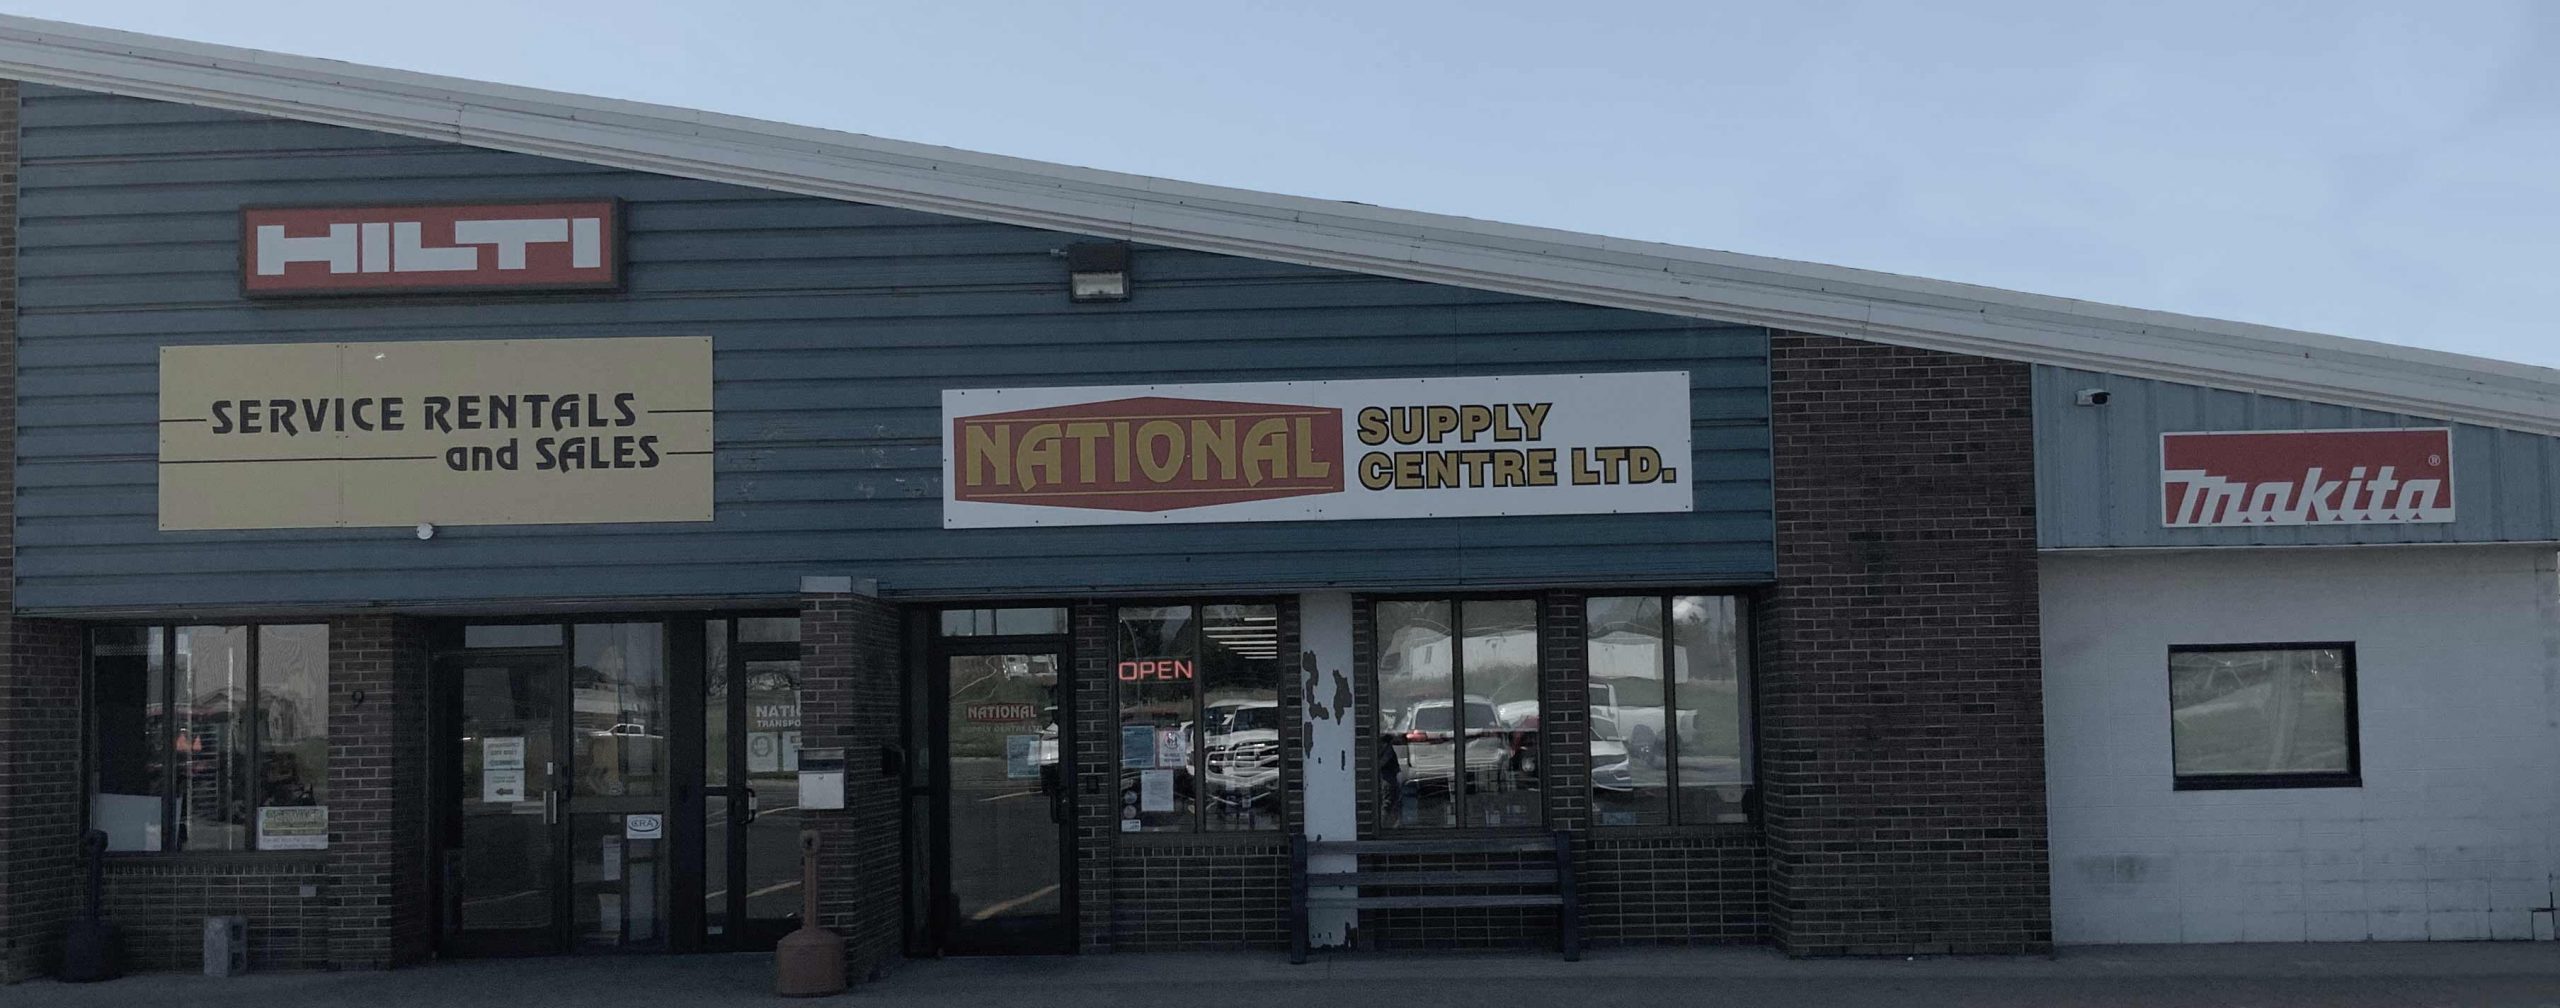 National Supply Centre Location